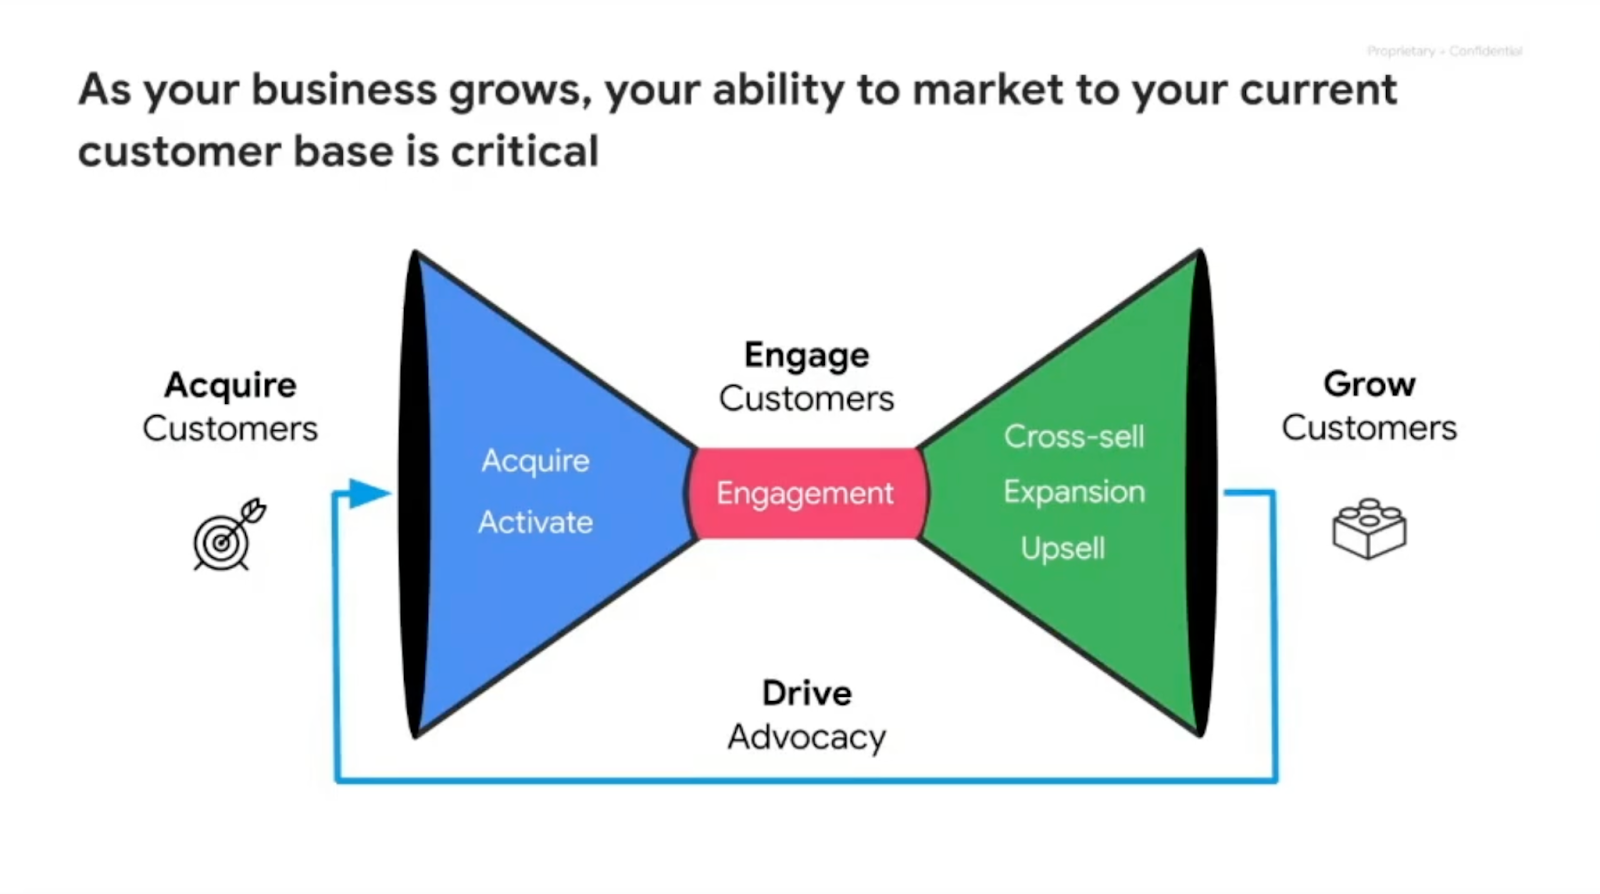 Customer funnel of acquisition, engagement, growth, and advocacy